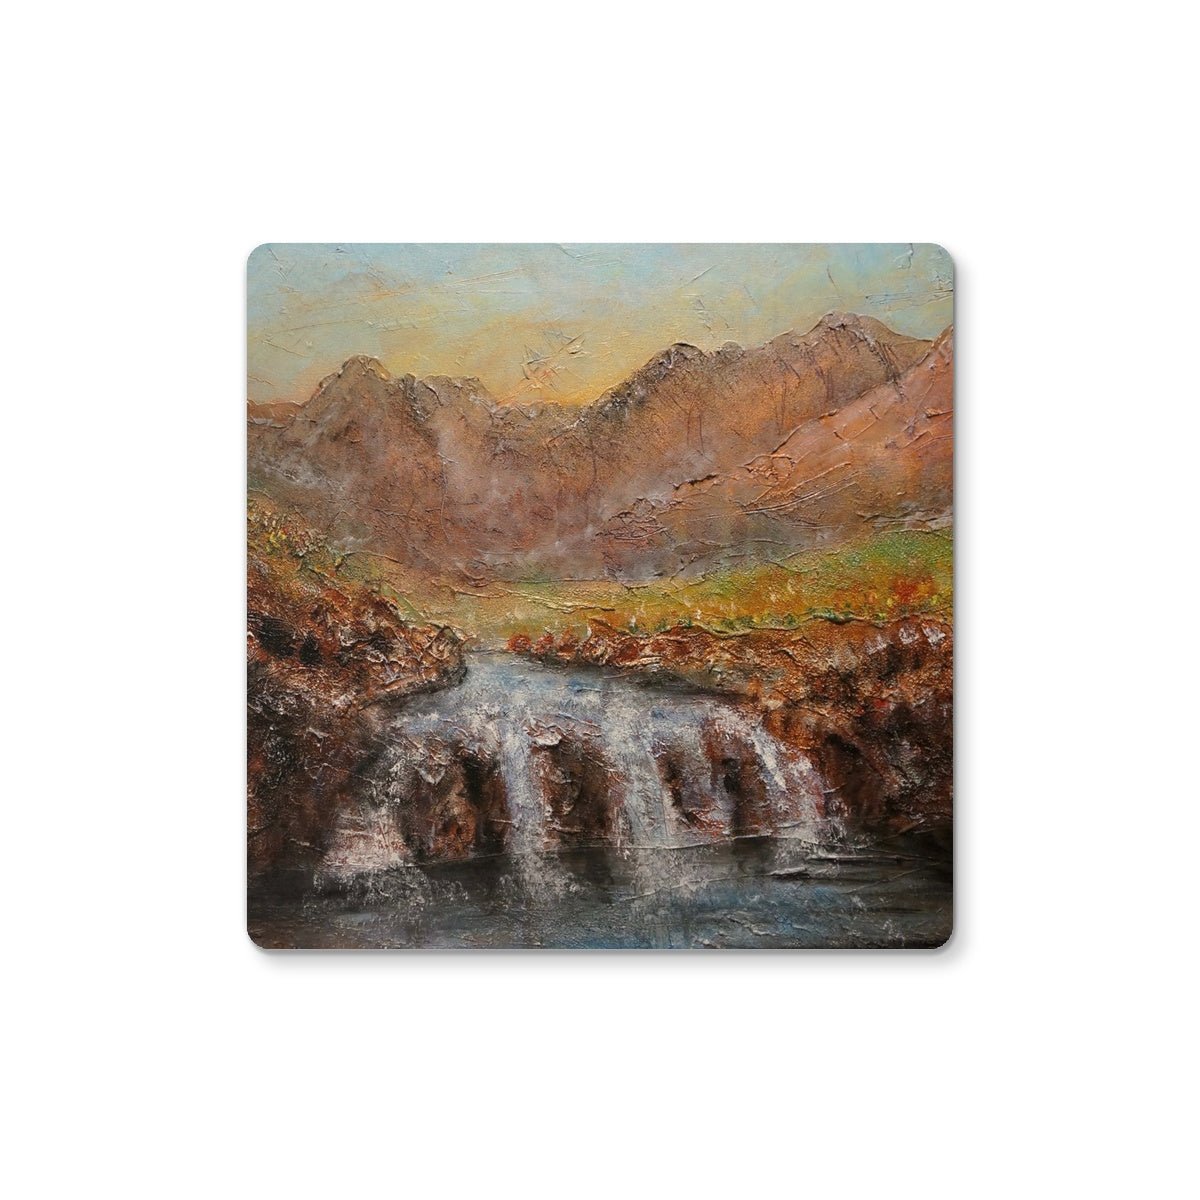 Fairy Pools Dawn Skye Art Gifts Coaster-Coasters-Skye Art Gallery-6 Coasters-Paintings, Prints, Homeware, Art Gifts From Scotland By Scottish Artist Kevin Hunter